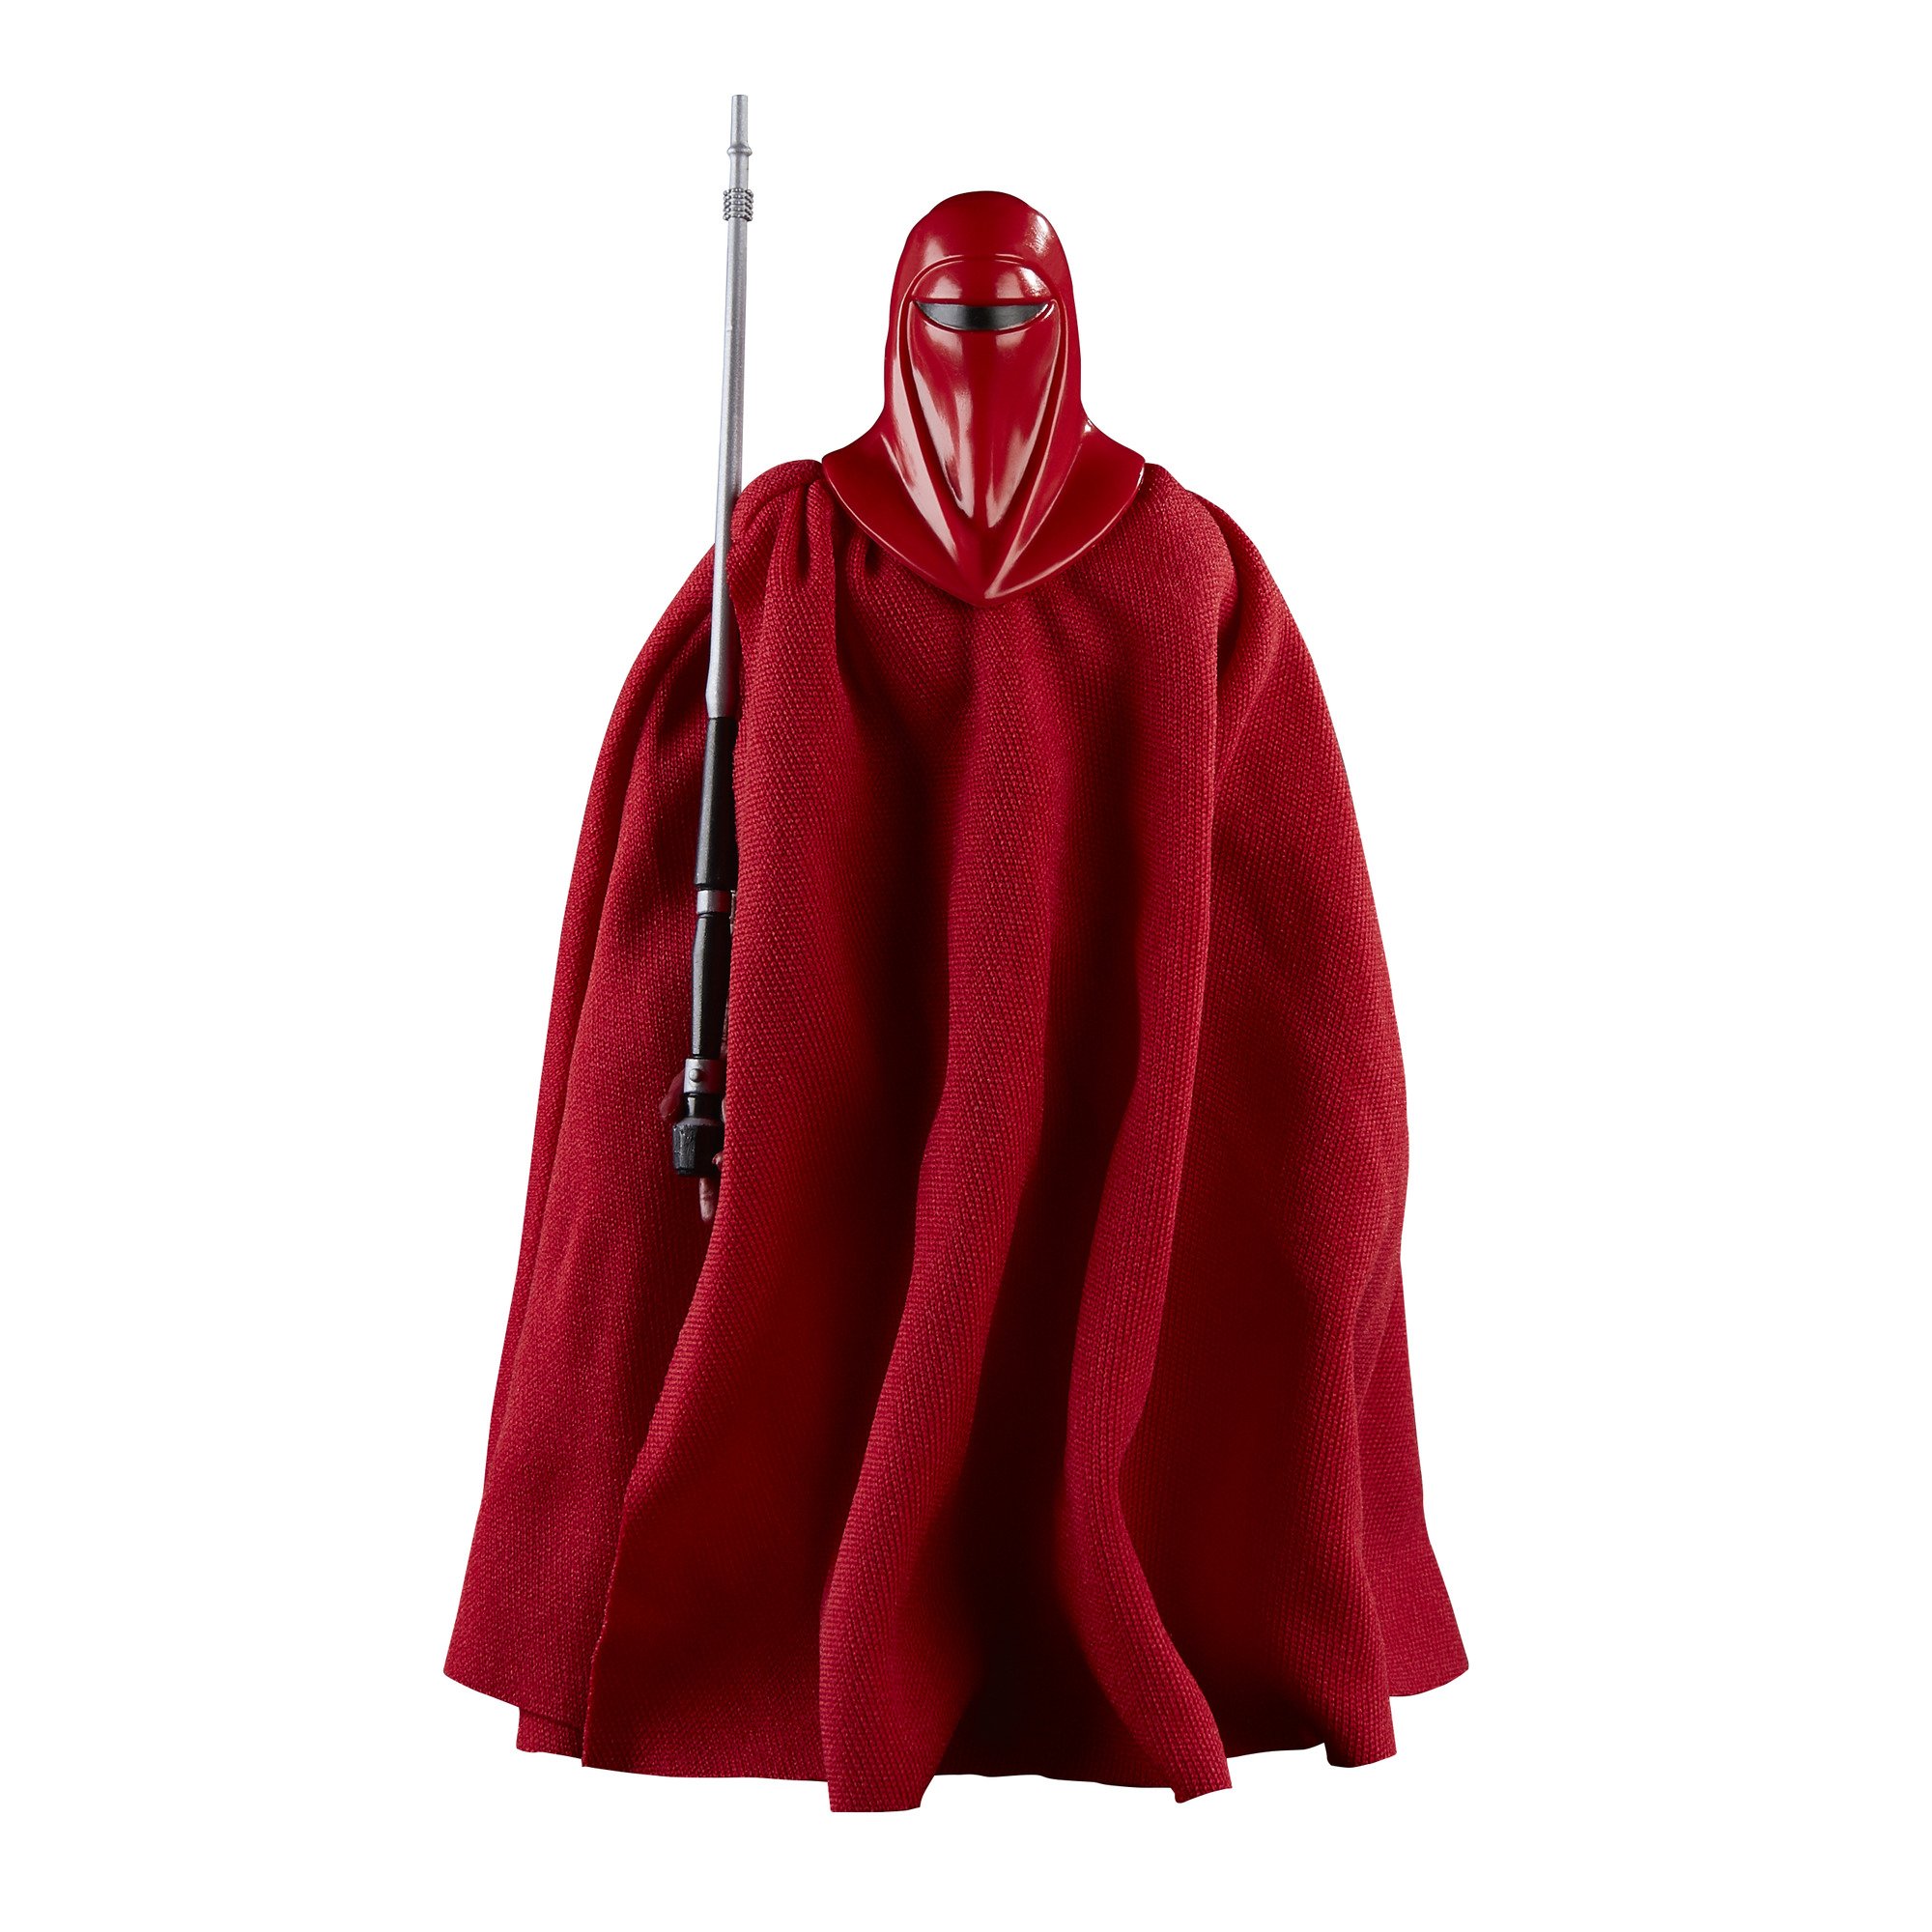 STAR WARS: Episode VI The Black Series Imperial Royal Guard, 6-inch